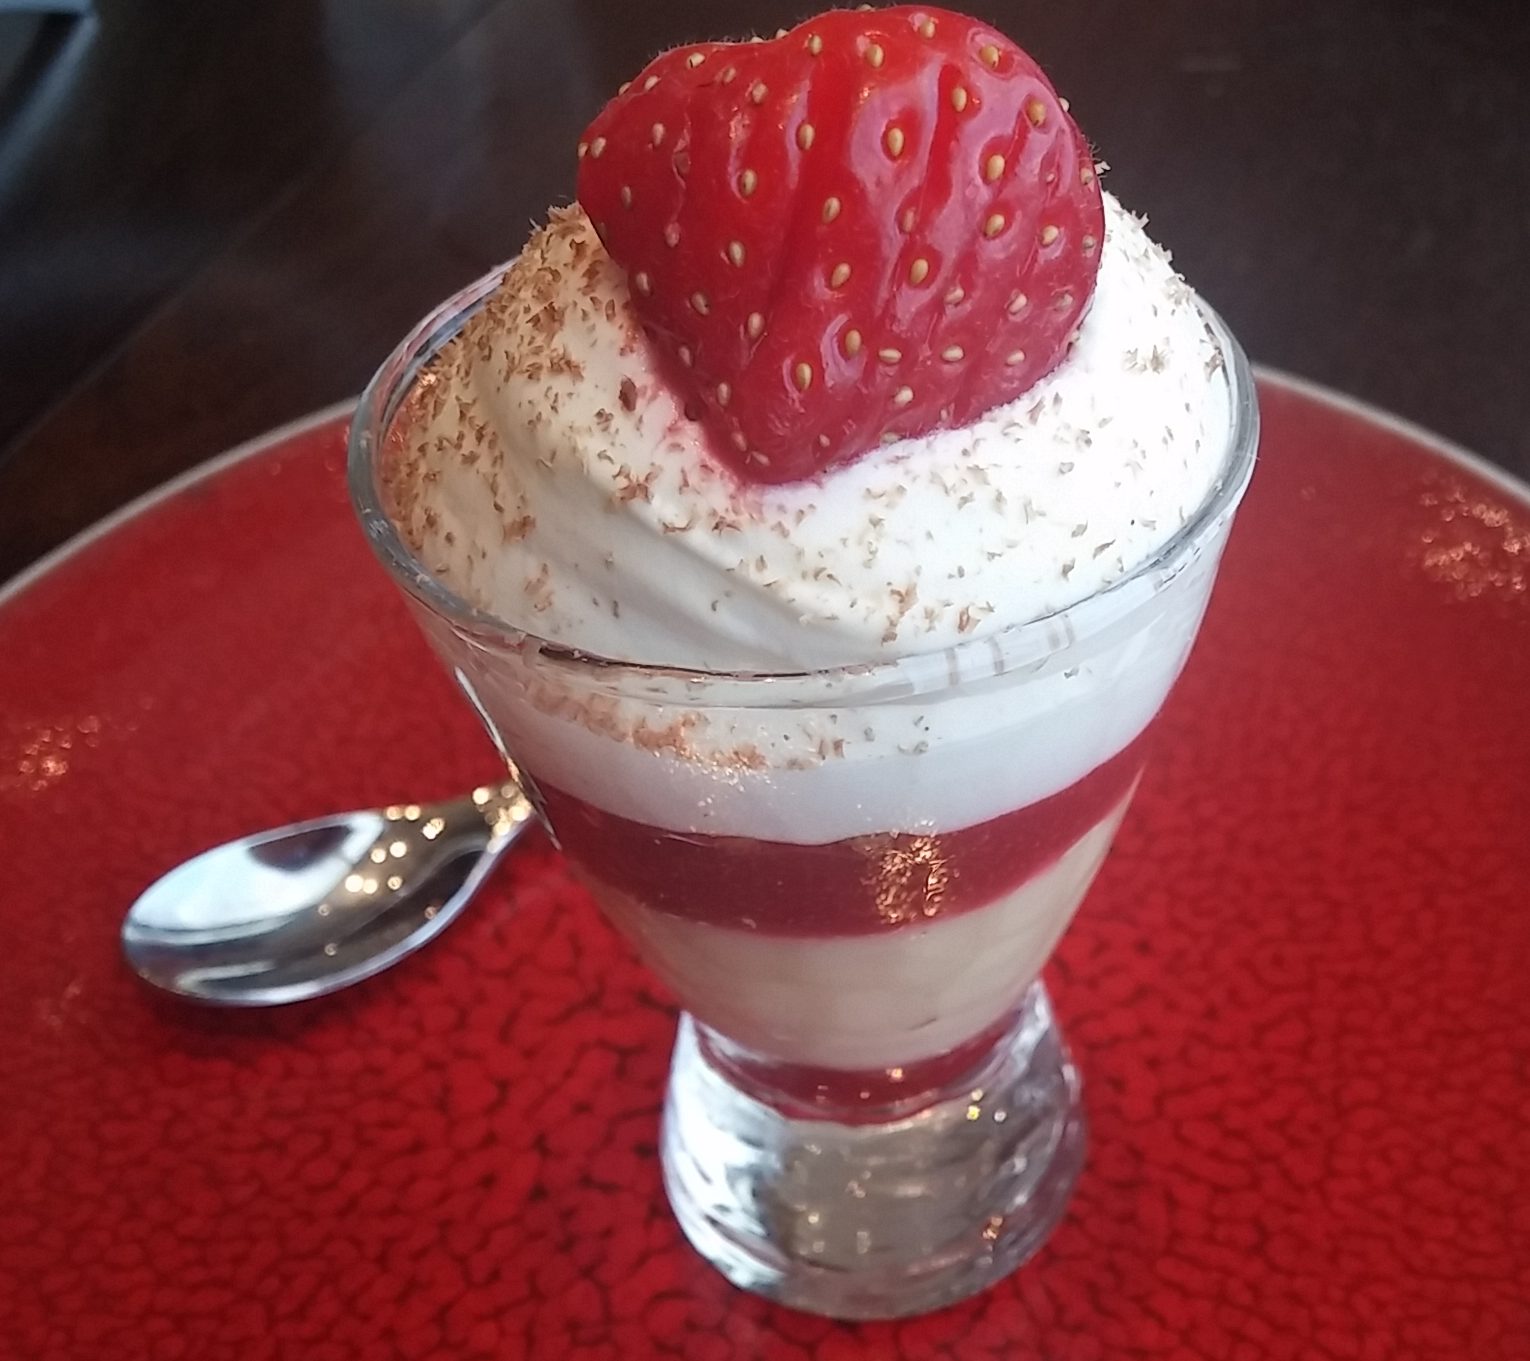 Spiced strawberry trifle